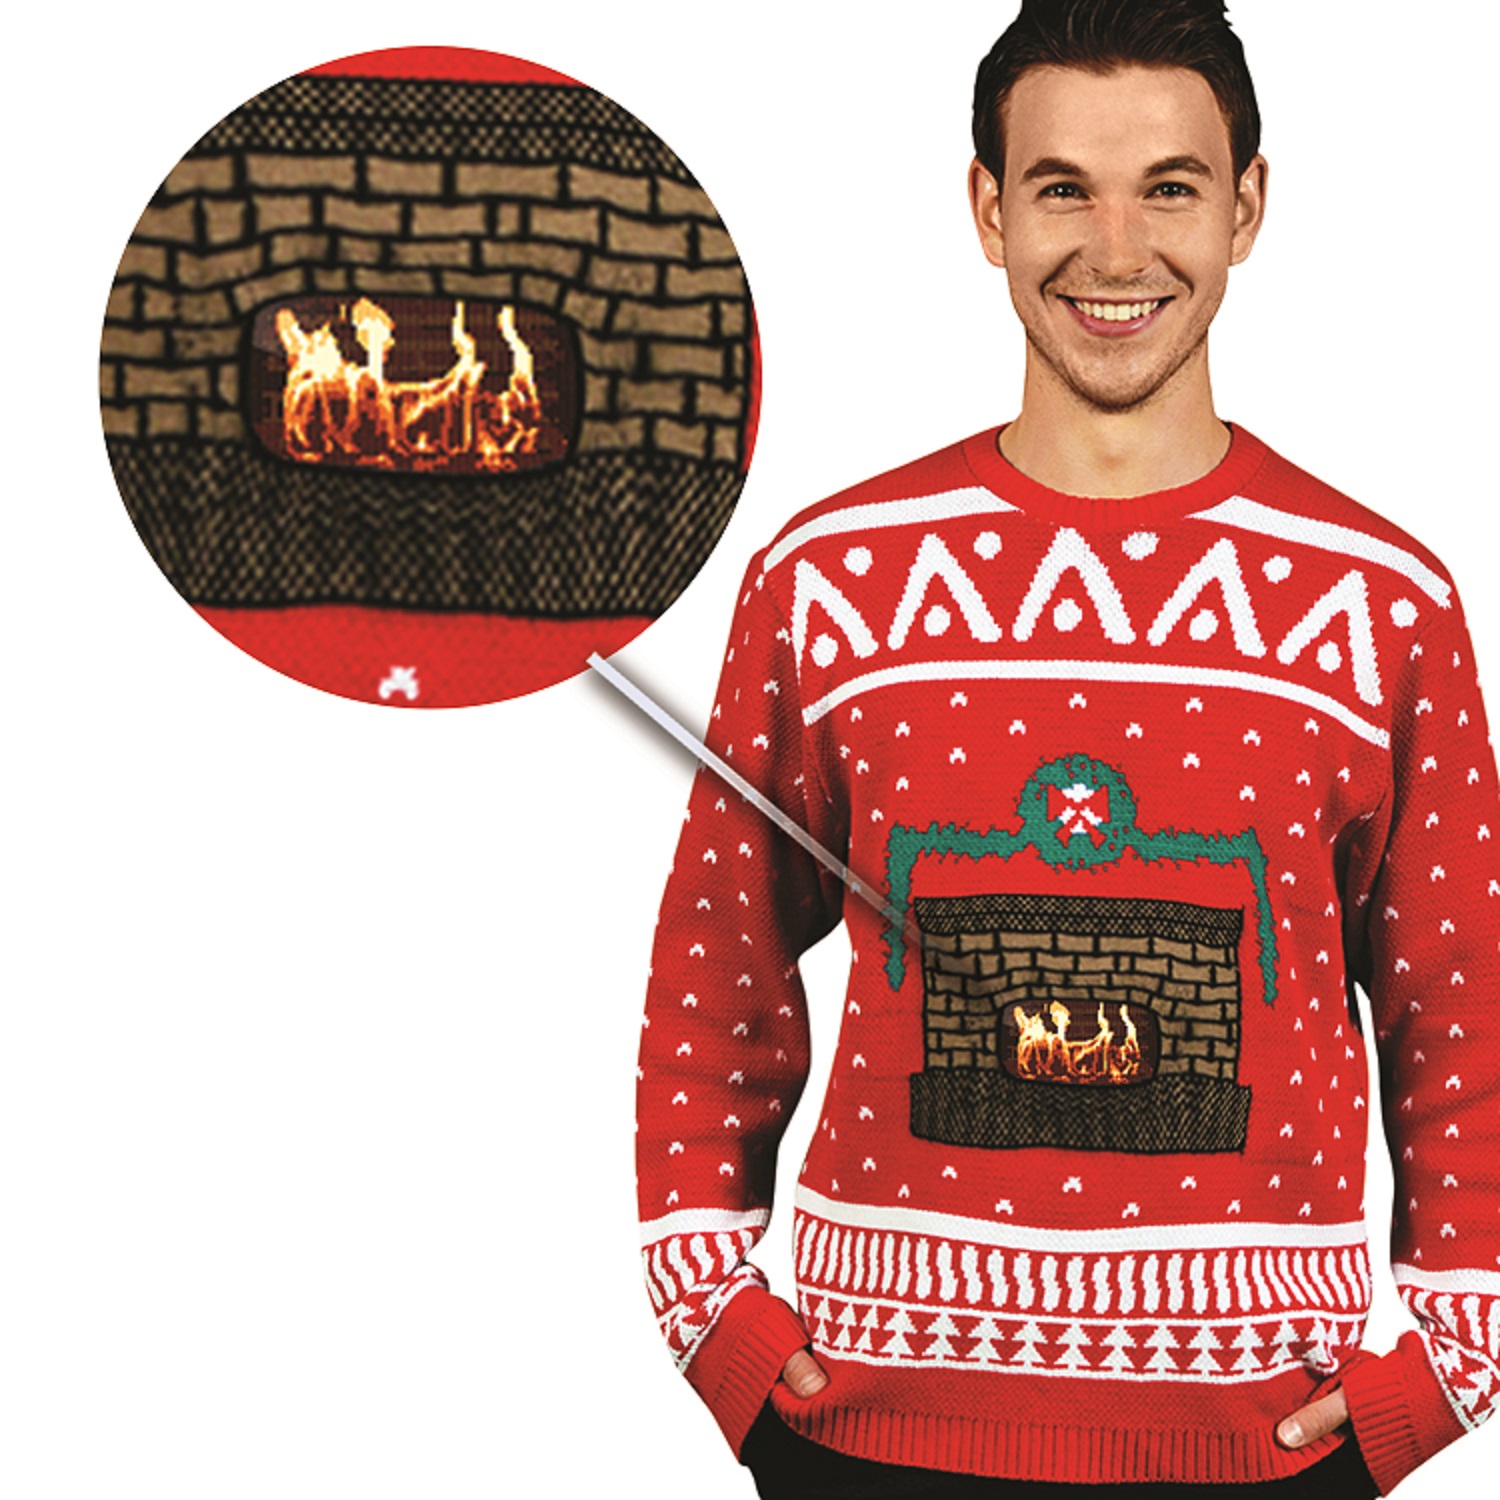 Turn Heads With an Animated Christmas Sweater